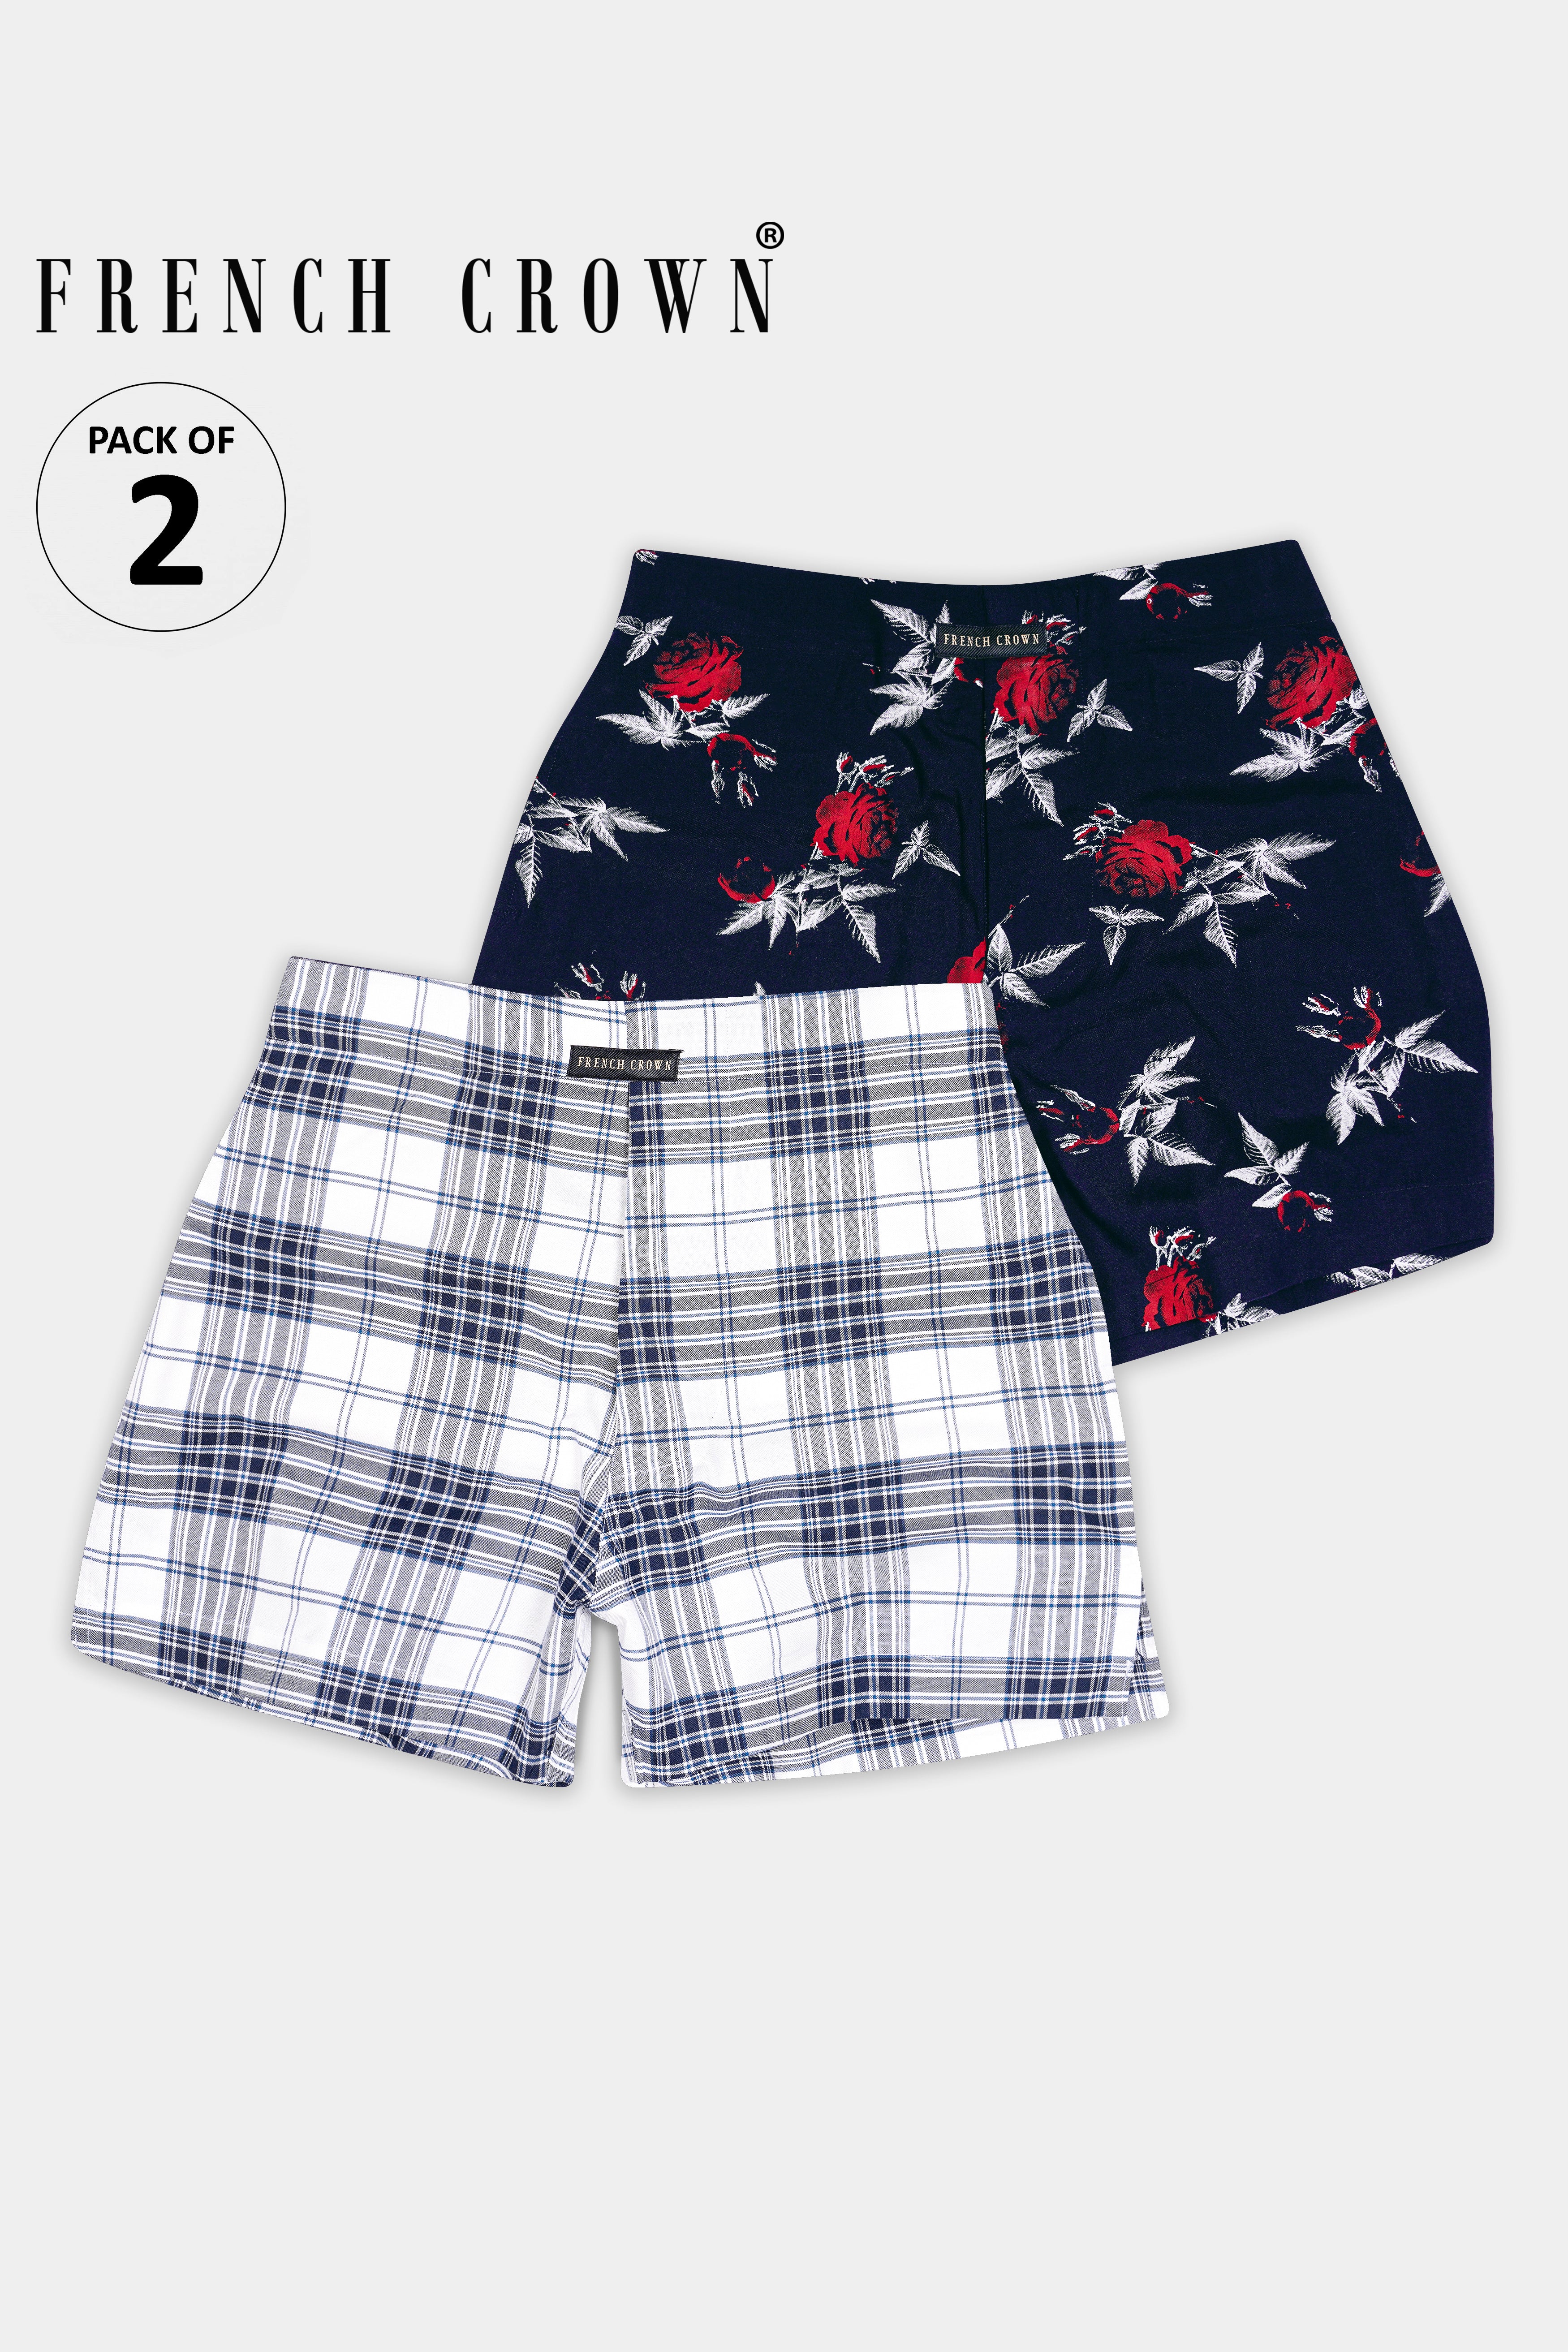 Haiti Blue With Stiletto Red Rose Printed Premium Tencel and Bright White with Twilight Blue Plaid Royal Oxford Boxers BX529-BX566-28, BX529-BX566-30, BX529-BX566-32, BX529-BX566-34, BX529-BX566-36, BX529-BX566-38, BX529-BX566-40, BX529-BX566-42, BX529-BX566-44